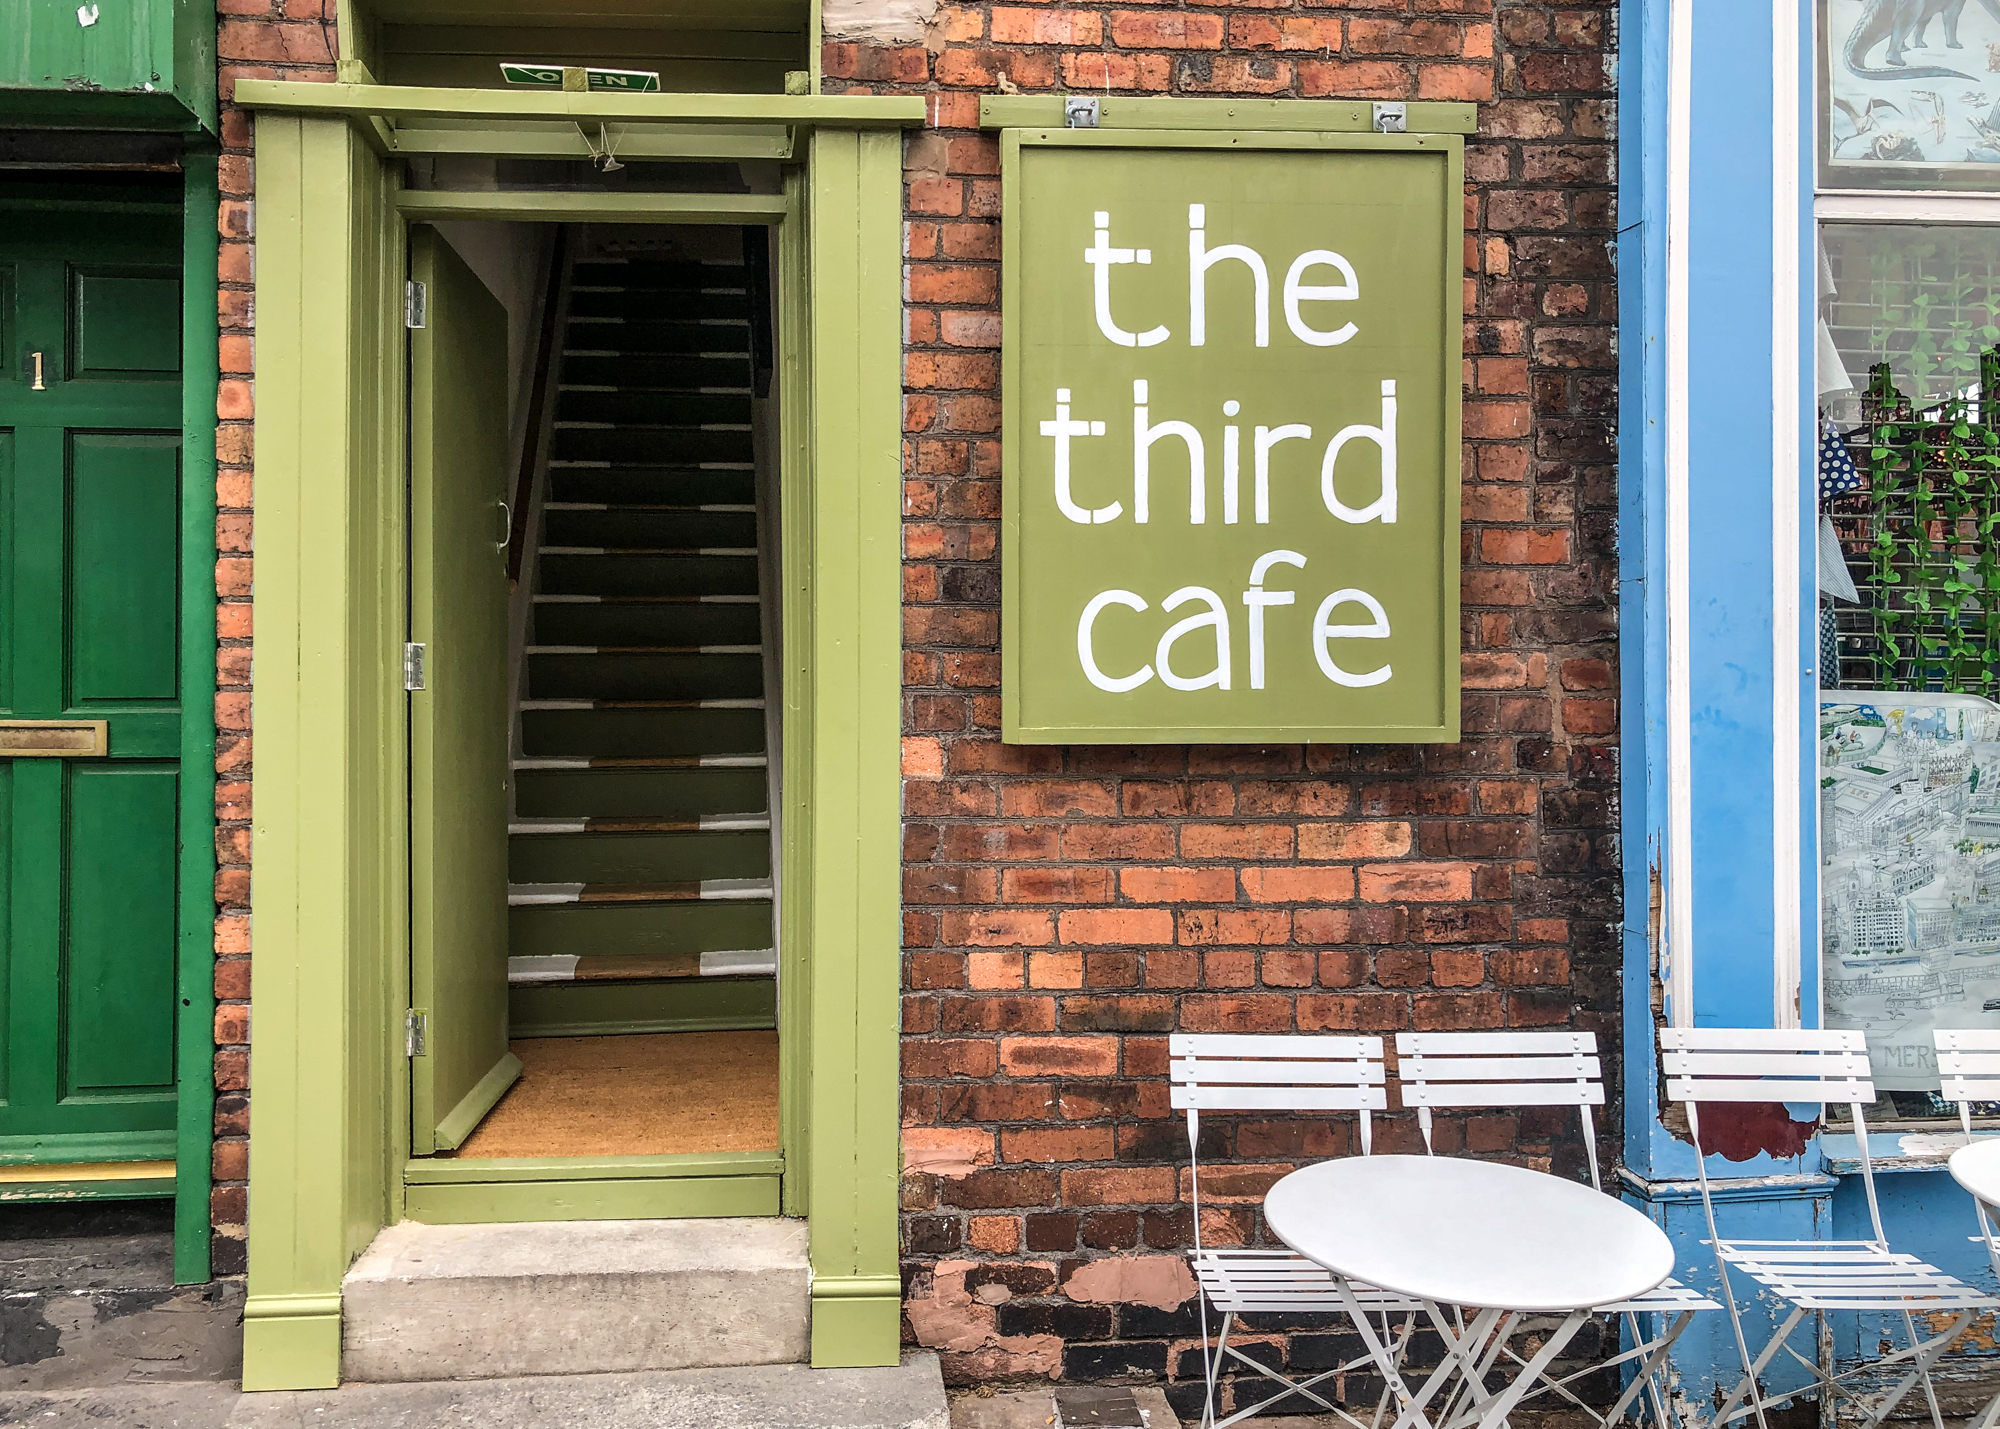 The Third Cafe